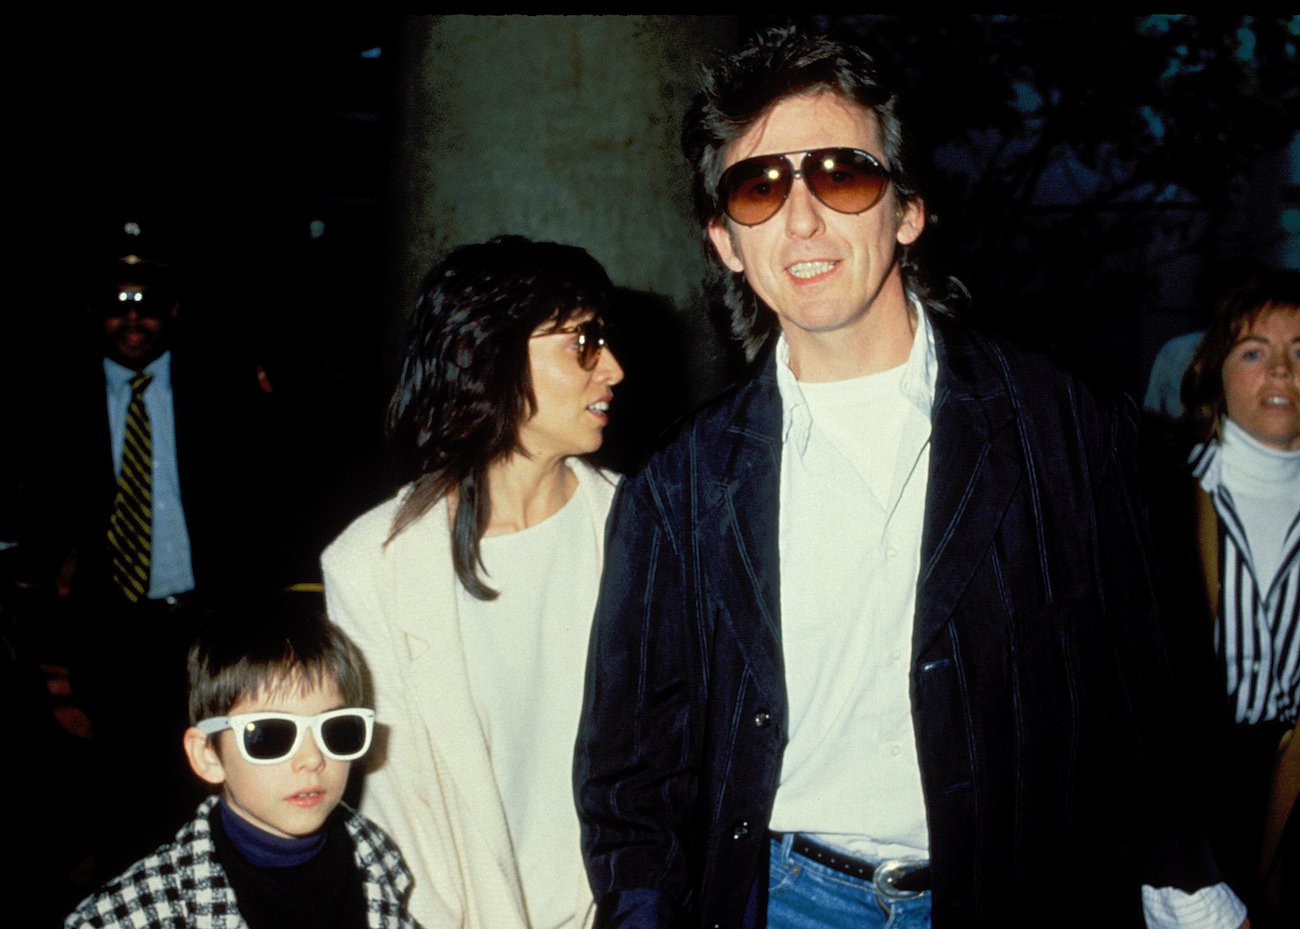 George Harrison Channeled His Father While Defending His Son, Dhani, During a Run-in With Police